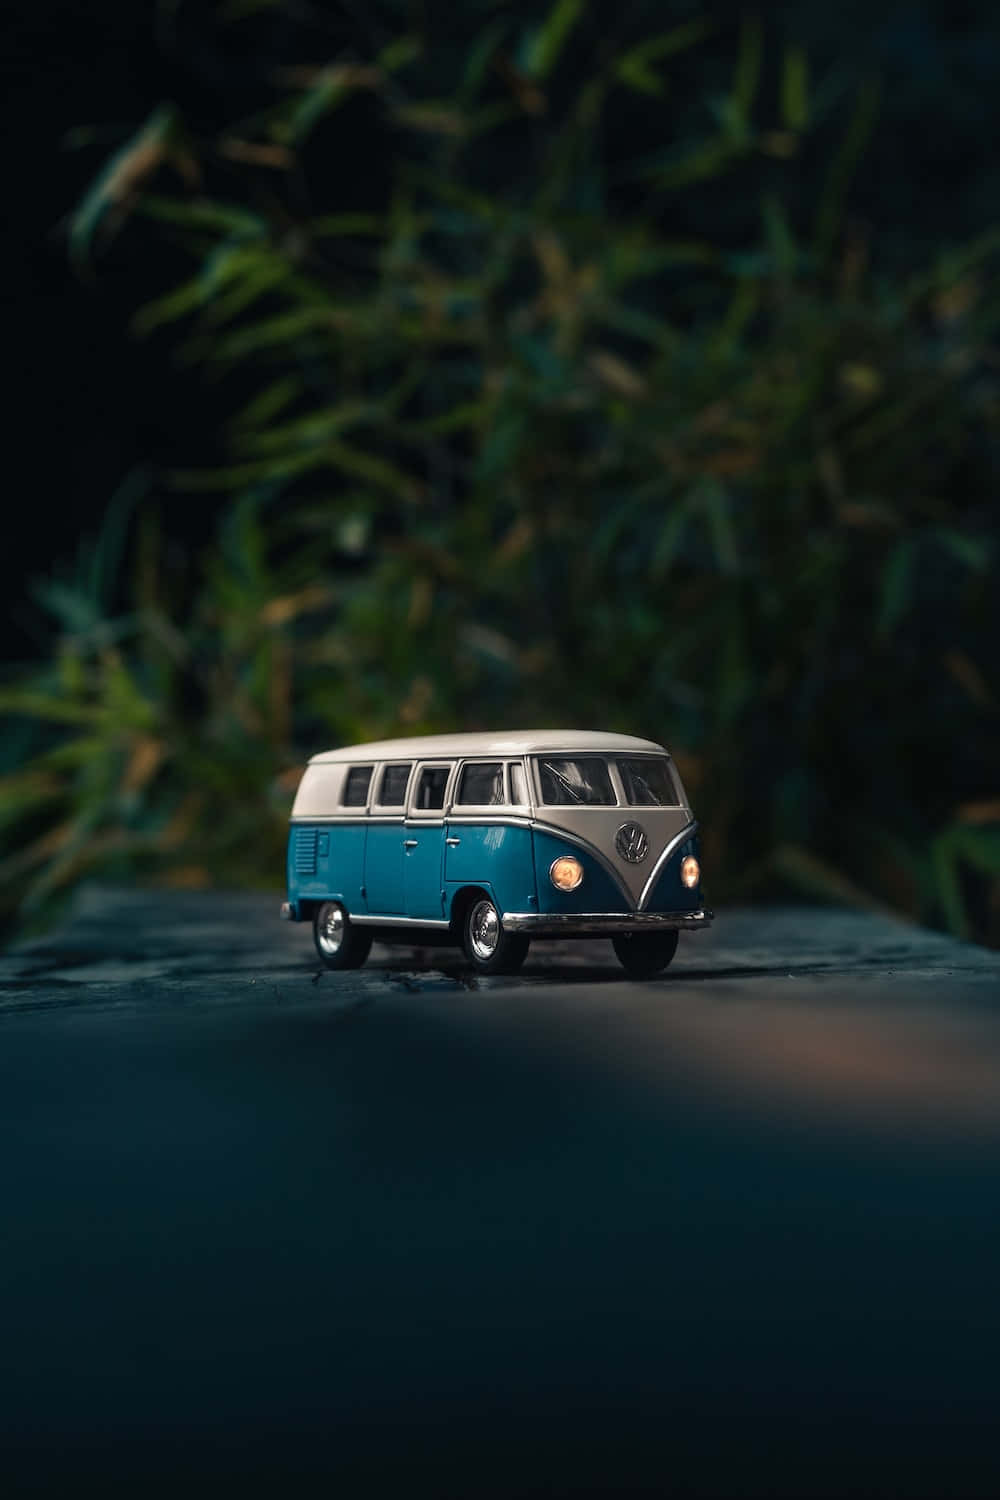 An old-fashioned blue van, energizing for a new journey.